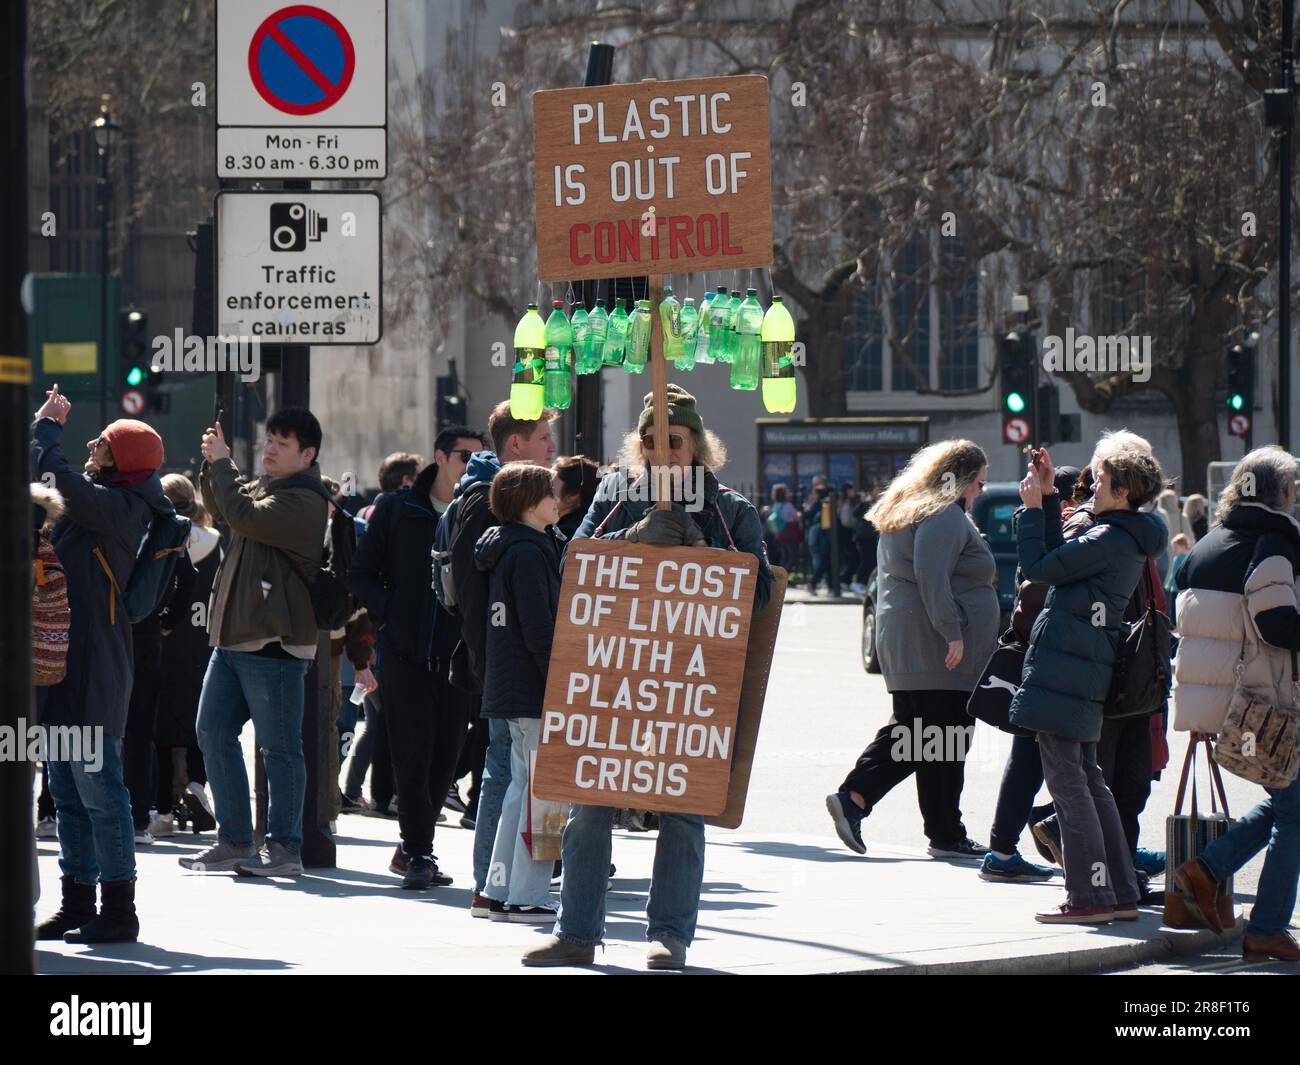 Plastic pollution protestor, demonstrator, outside The houses of Parliament with sandwich board stating 'Plastic is out of control' Stock Photo